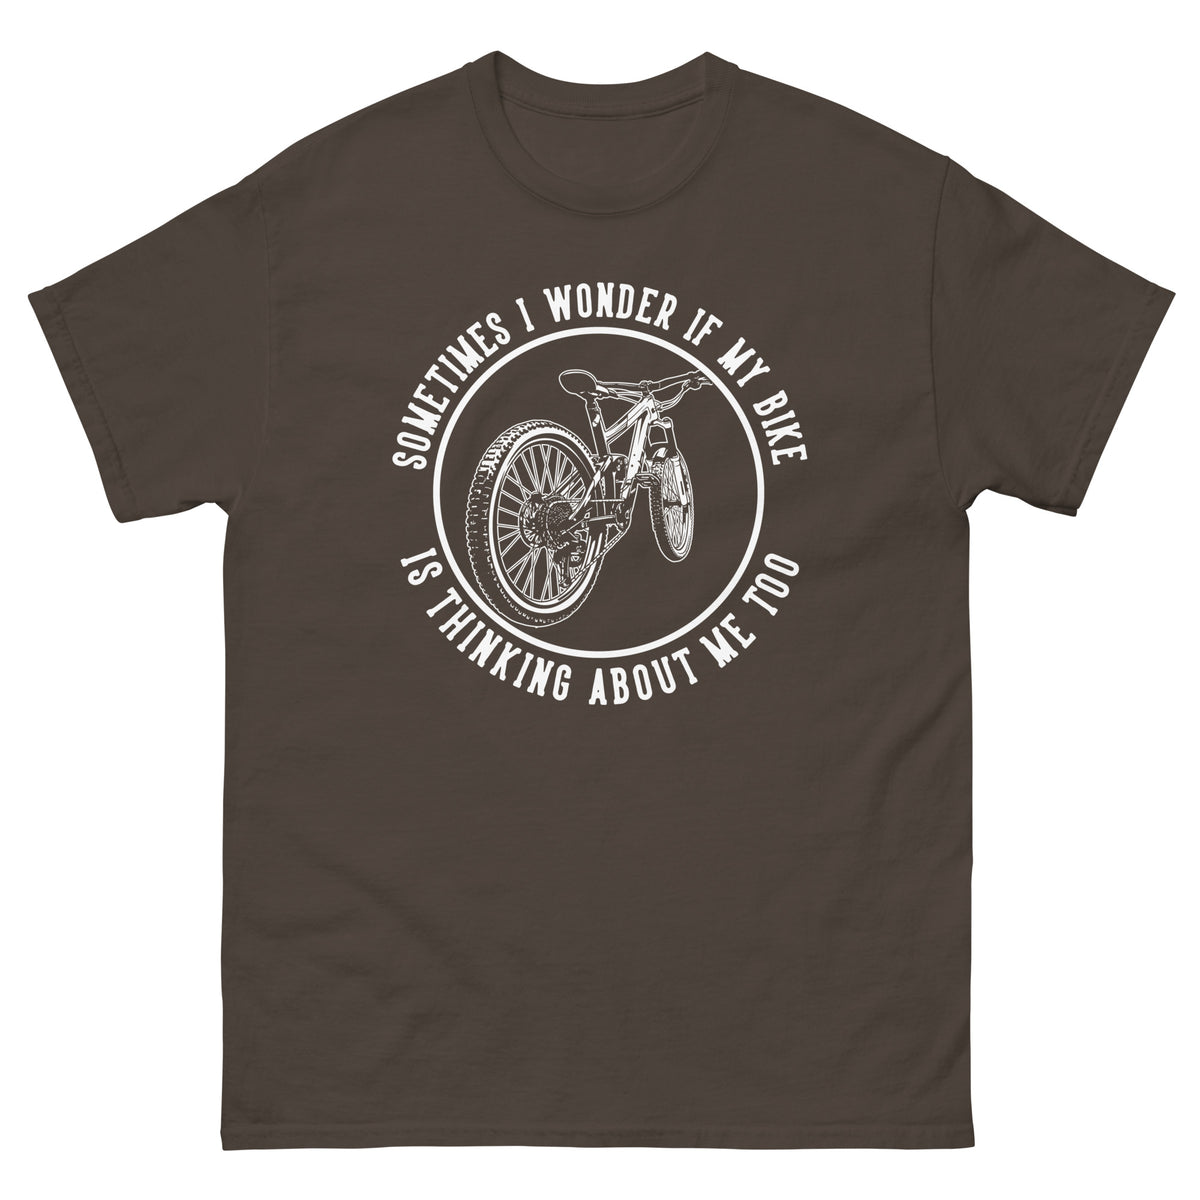 Fahrrad Shirts "Sometimes I Wonder If My Bike Is Thinking About Me Too" Variane 8